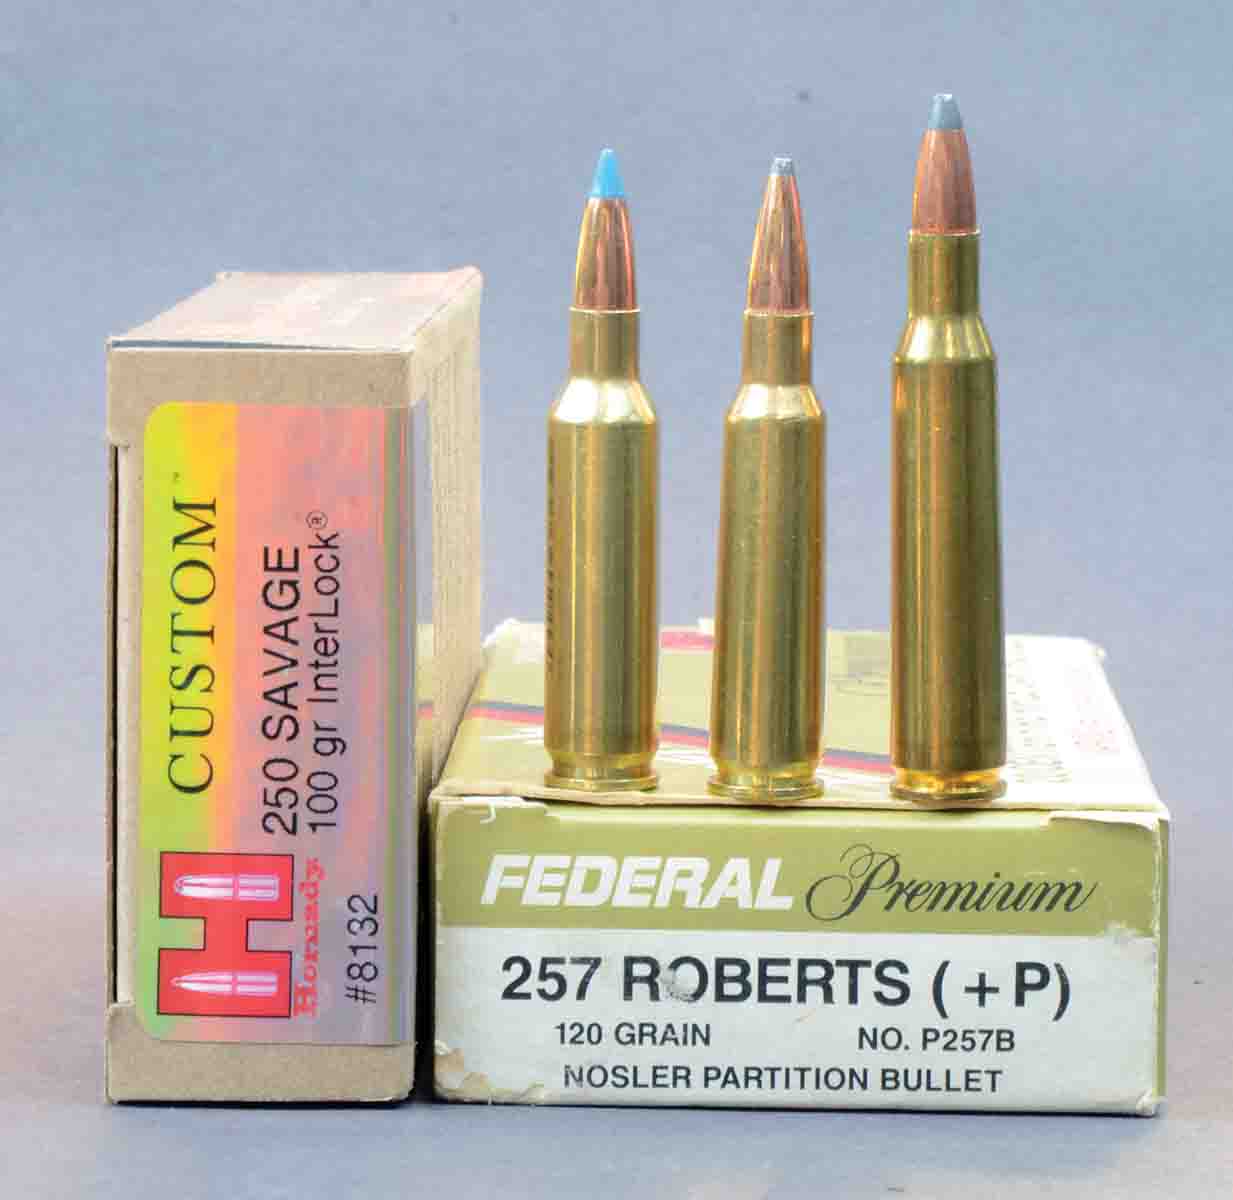 When 100-grain bullets are loaded to maximum pressure and fired in 24-inch barrels, the .250 Savage Improved is about 100 fps faster than the standard .250 Savage, and about 300 fps faster than Hornady’s factory load. It should not be expected to equal the velocity of the larger .257 Roberts when it is handloaded to maximum pressure. Cartridges include (left to right): a .250 Savage Improved, .250 Savage and a .257 Roberts.